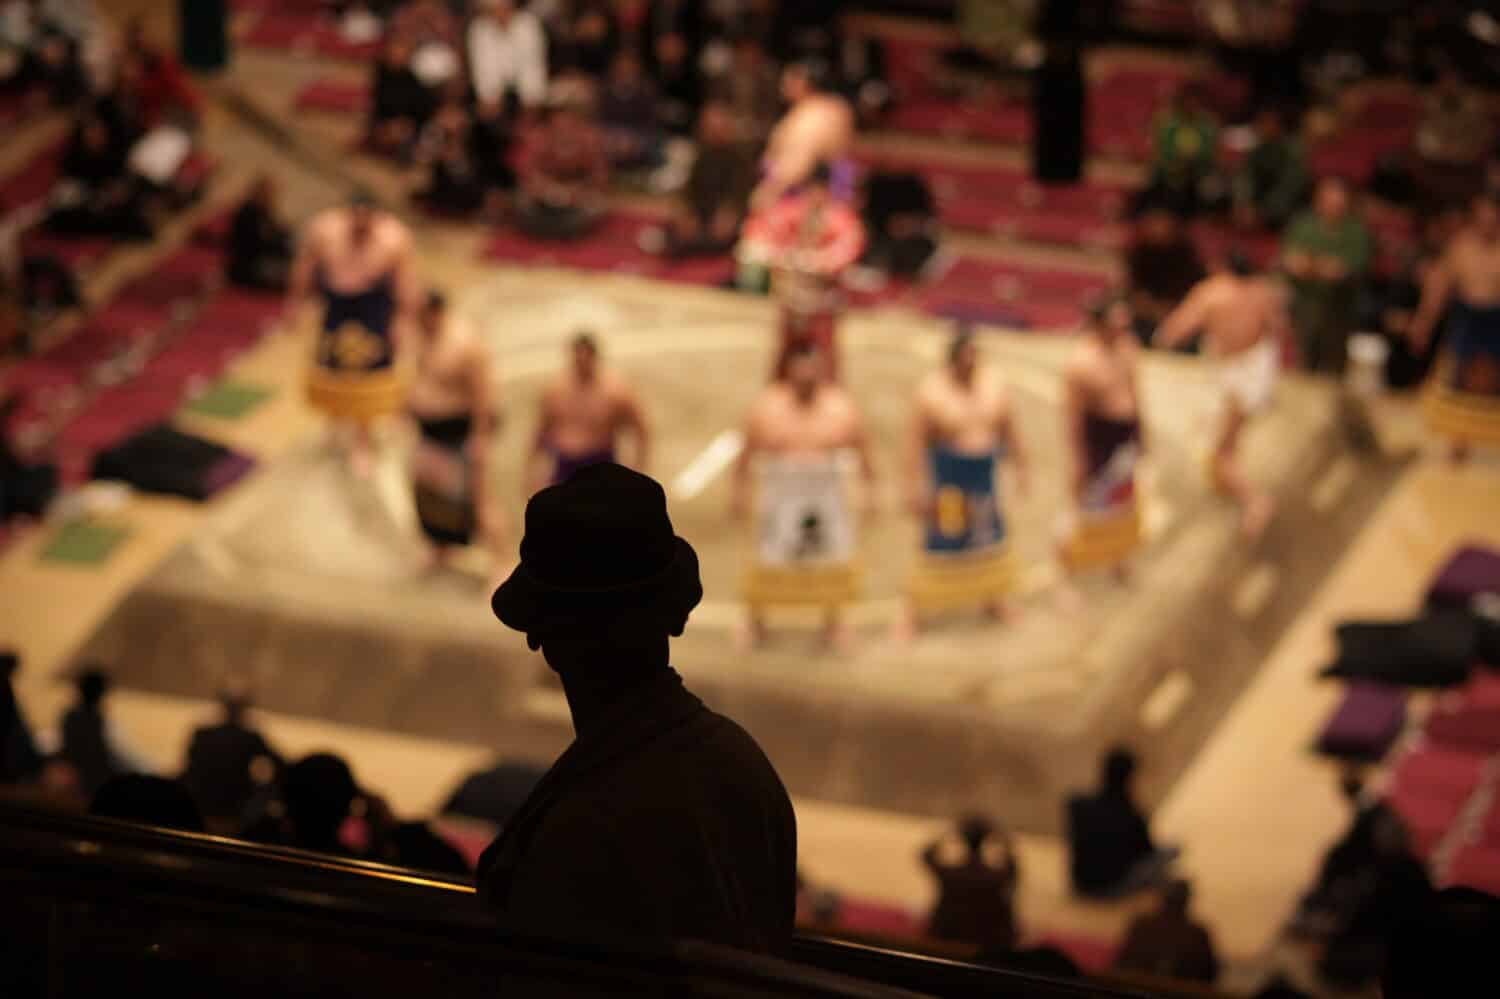 Silhouette of an elderly man watching sumo wrestlers standing in a ceremonial ring